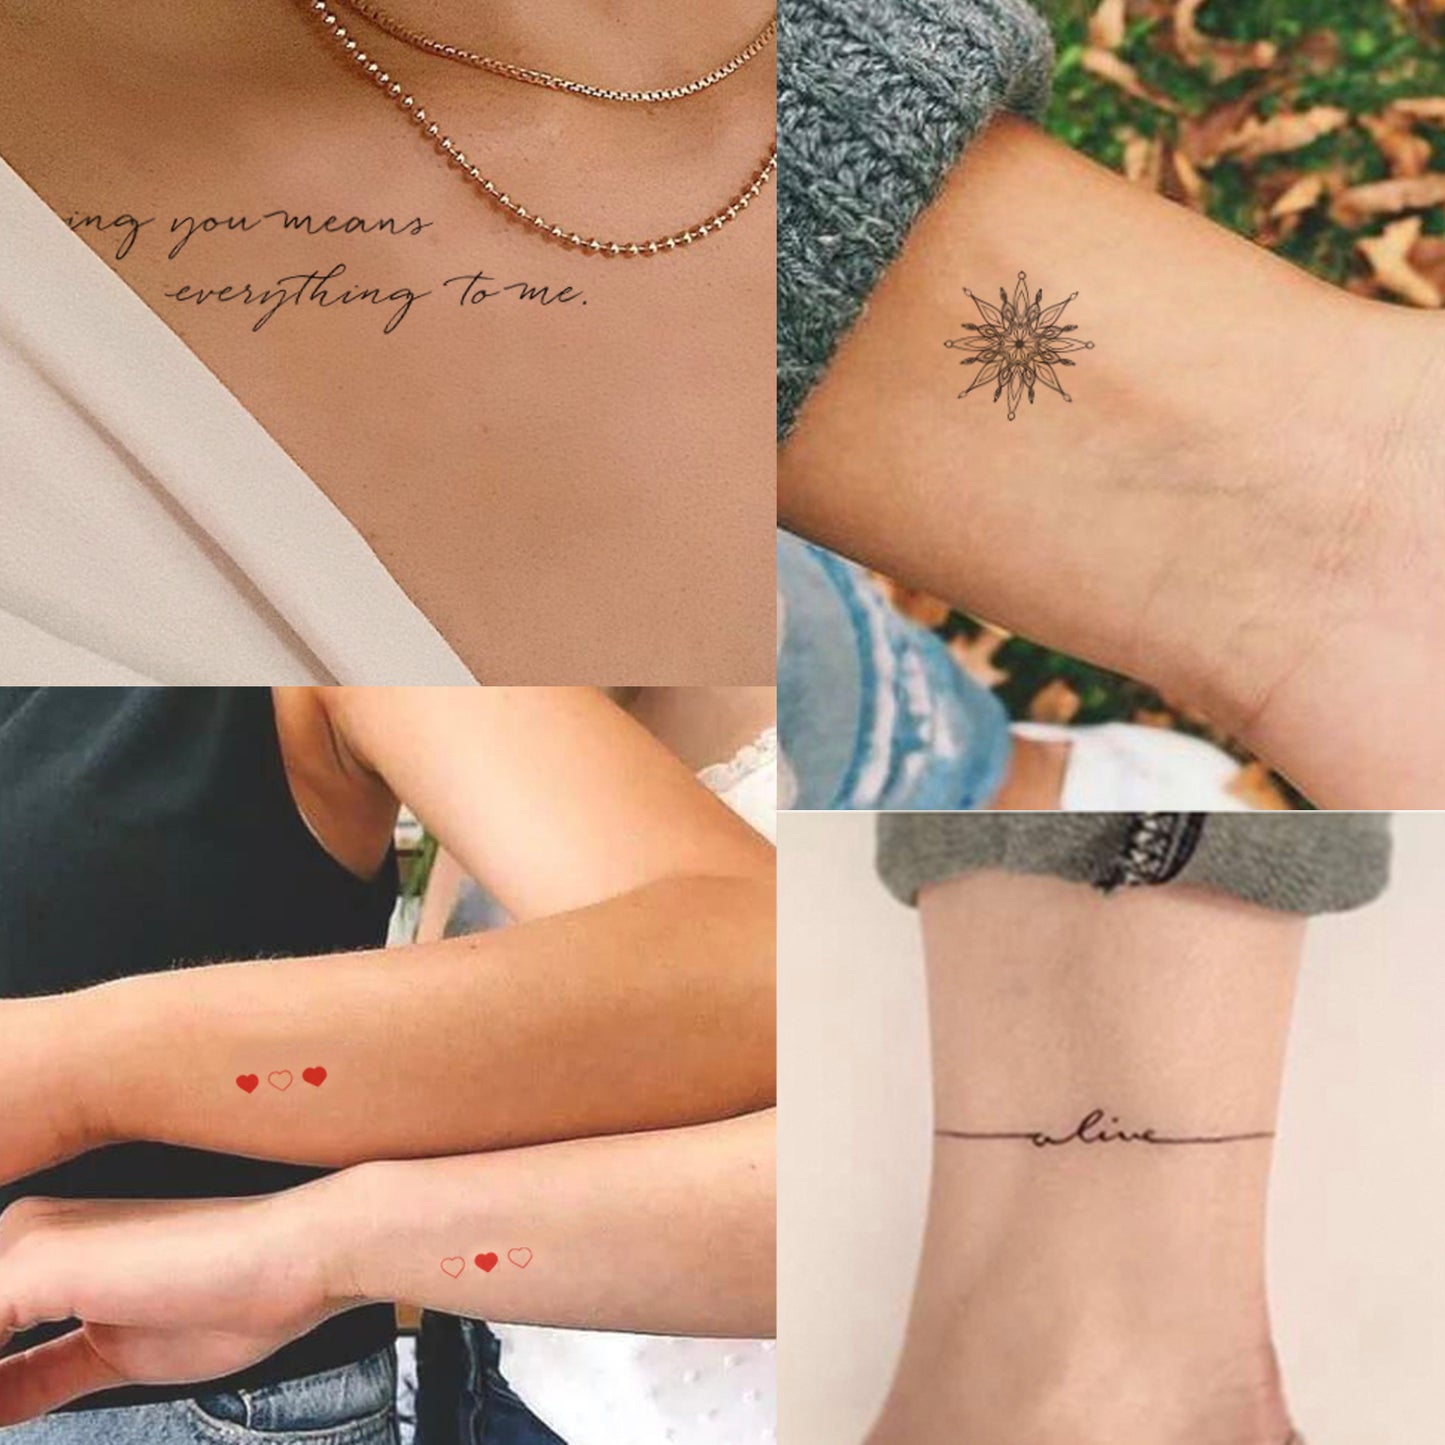 inspirational quotes scriptures cursive words tattoos on women shoulder cute tiny mini small hearts stars tattoos simple alive line bracelet wrist ankle tattoo stickers